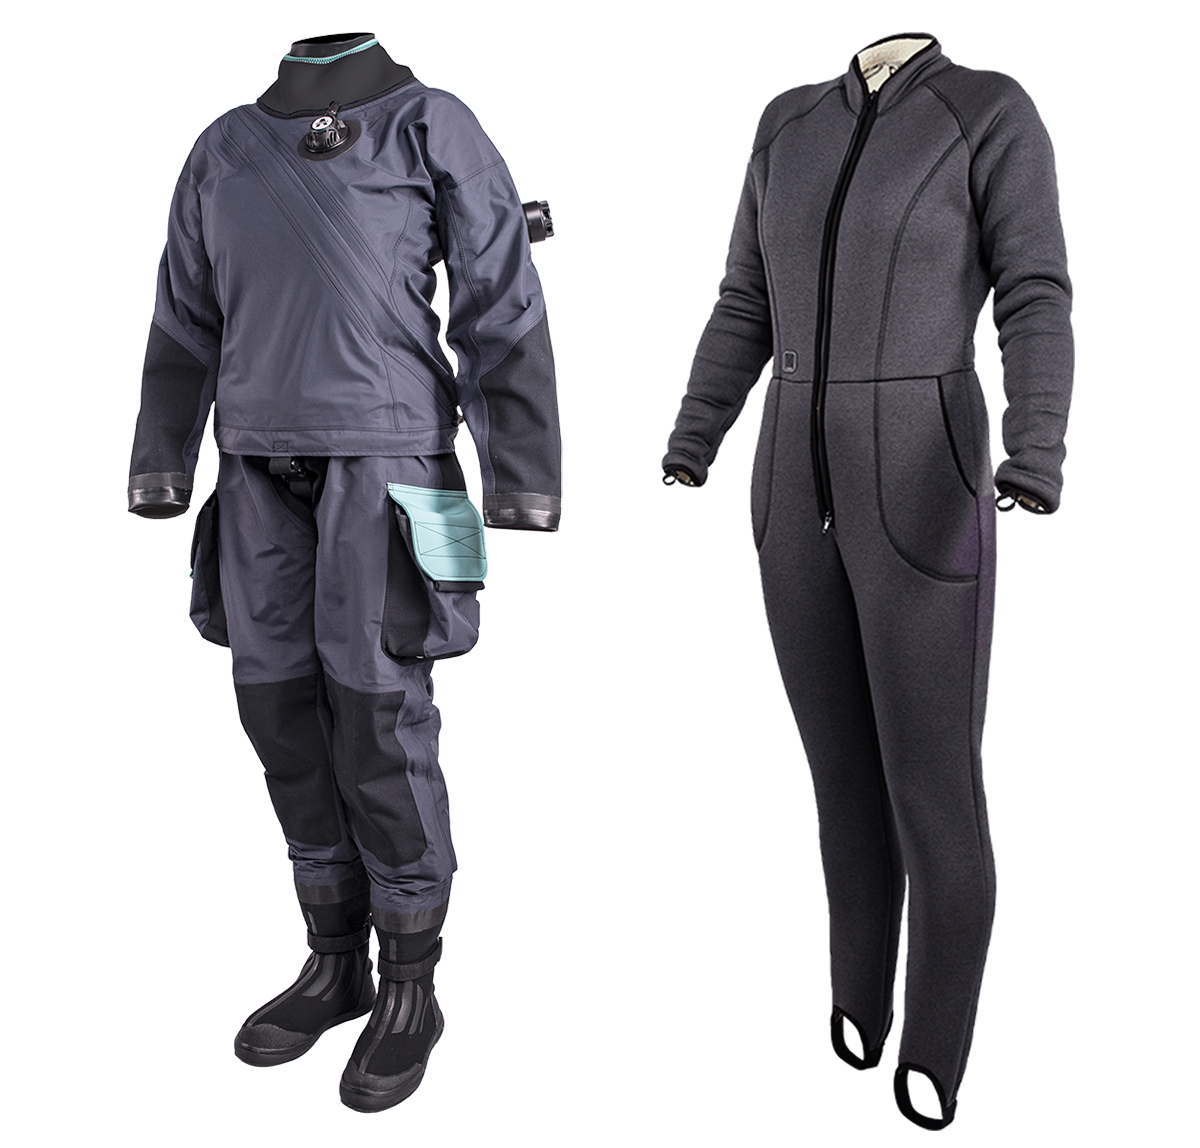 Avatar 101 Ladie's Breathable Drysuit and Undergarment Package